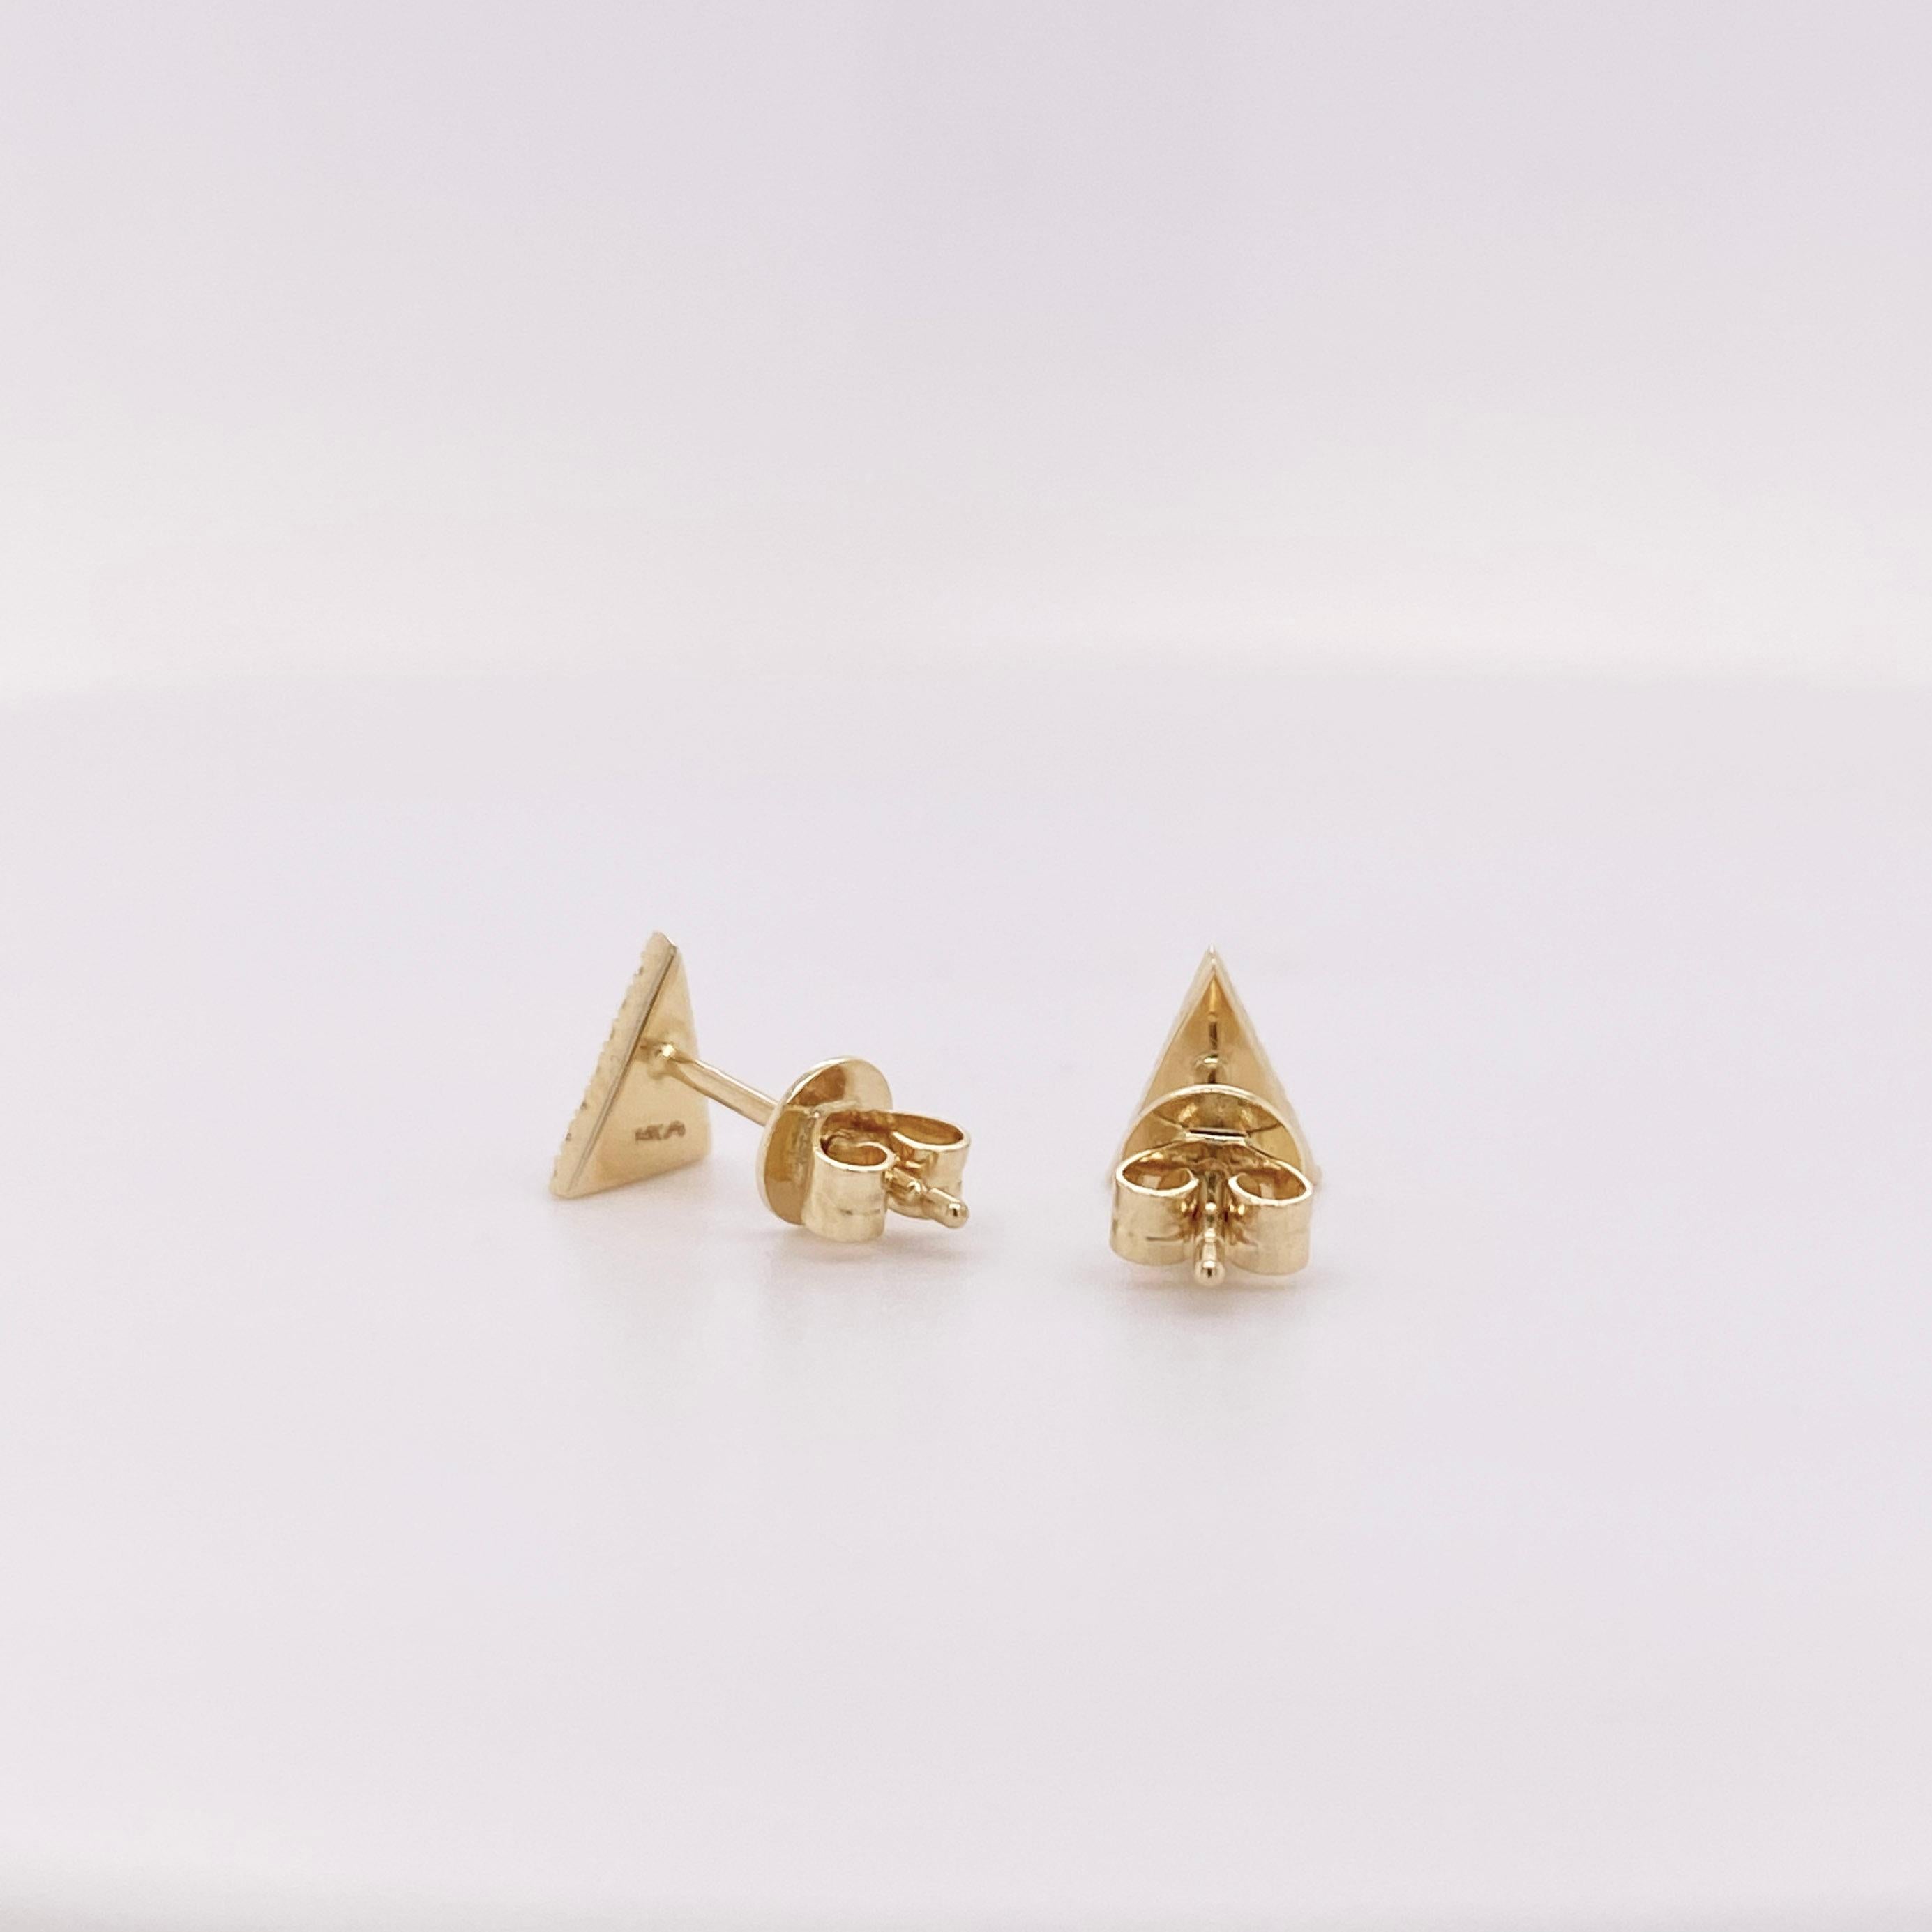 Round Cut Petite Pave Diamond Triangle Stud Earrings in 14K Yellow Gold 1/10 Carat For Sale